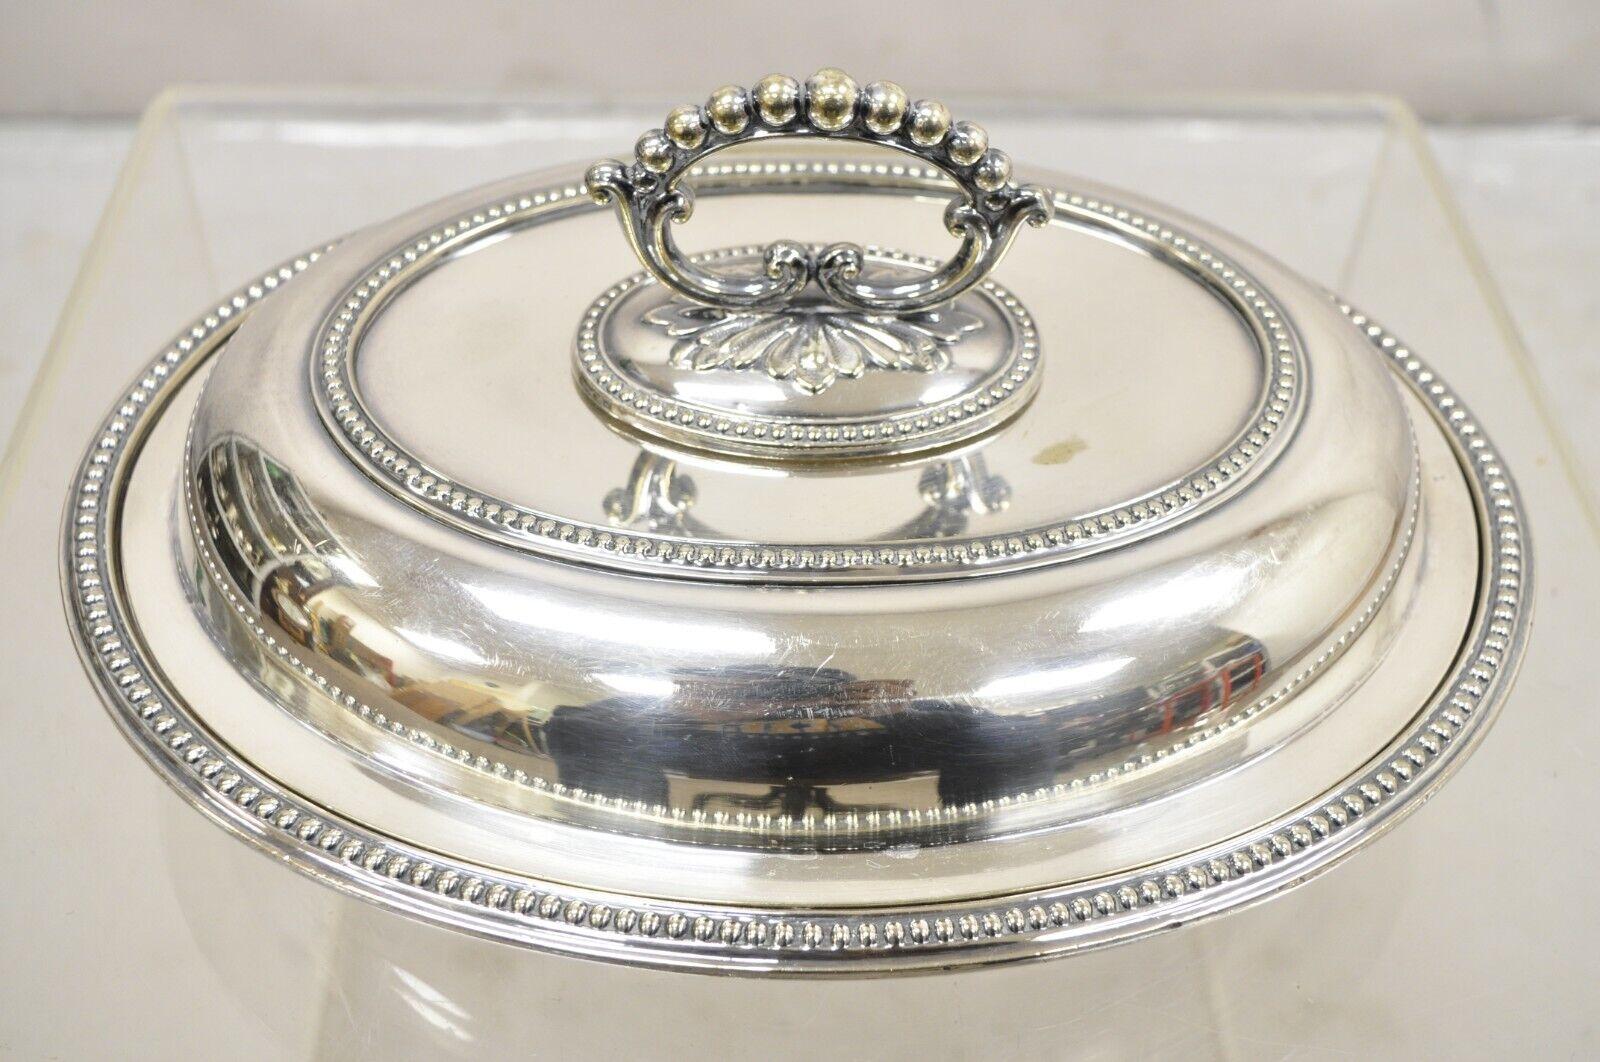 Antique Mappin & Webb's Prince's Plate English Sheffield Silver Plated Covered Serving Dish. Item features an ornate removable handle, oval form, original hallmark. Circa Early 20th Century. Measurements: 6